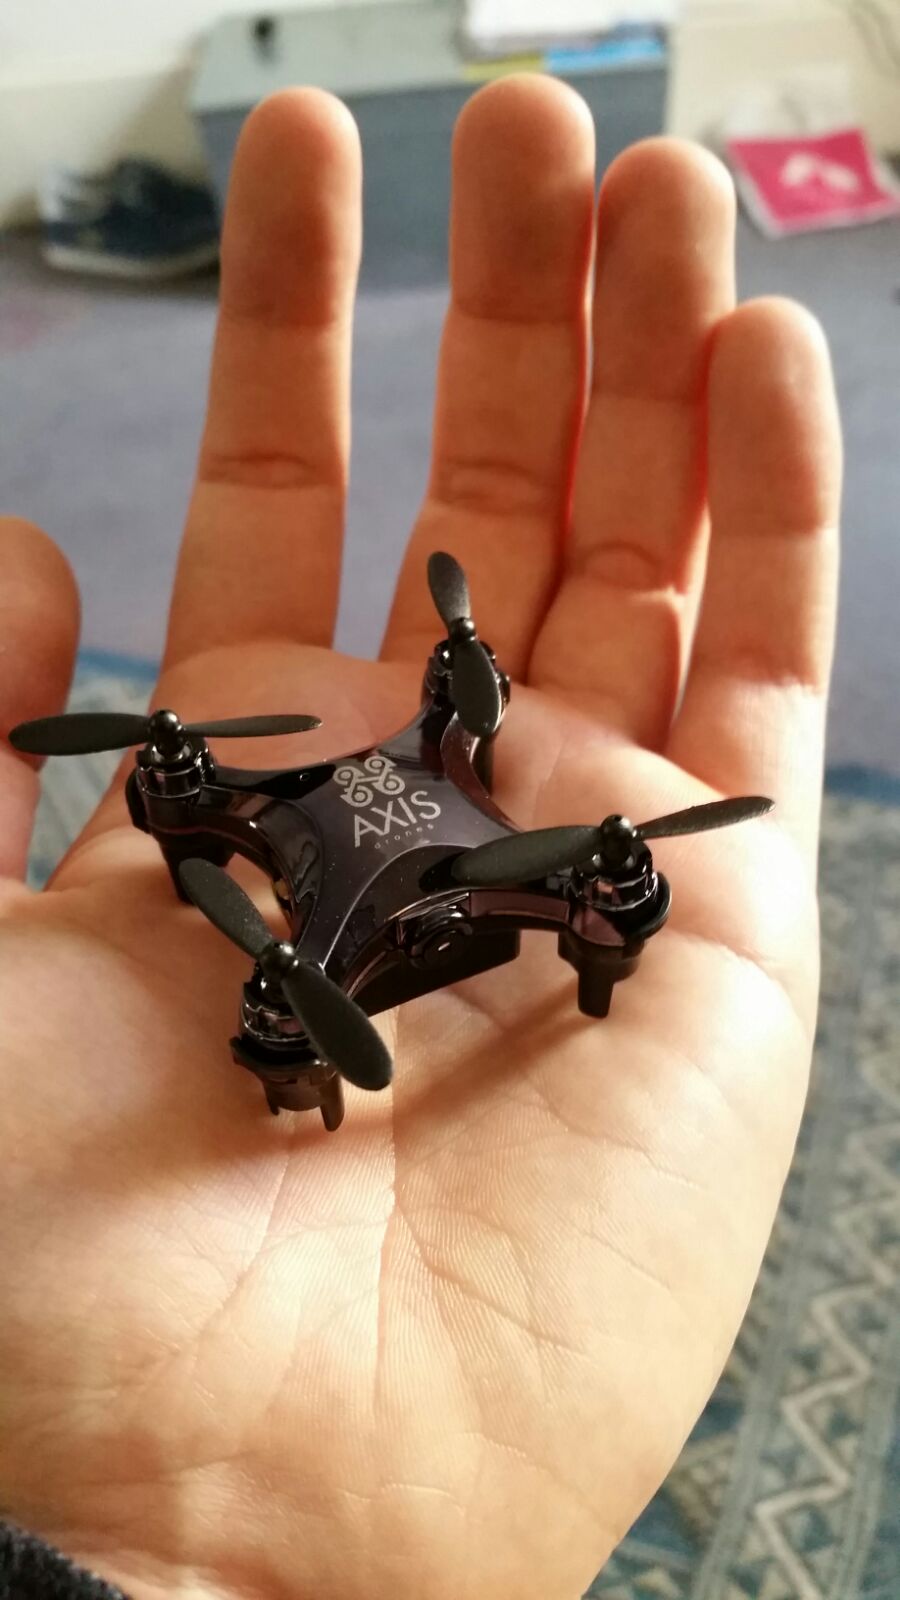 Axis Vidius- A Review of the World's Smallest FPV Drone